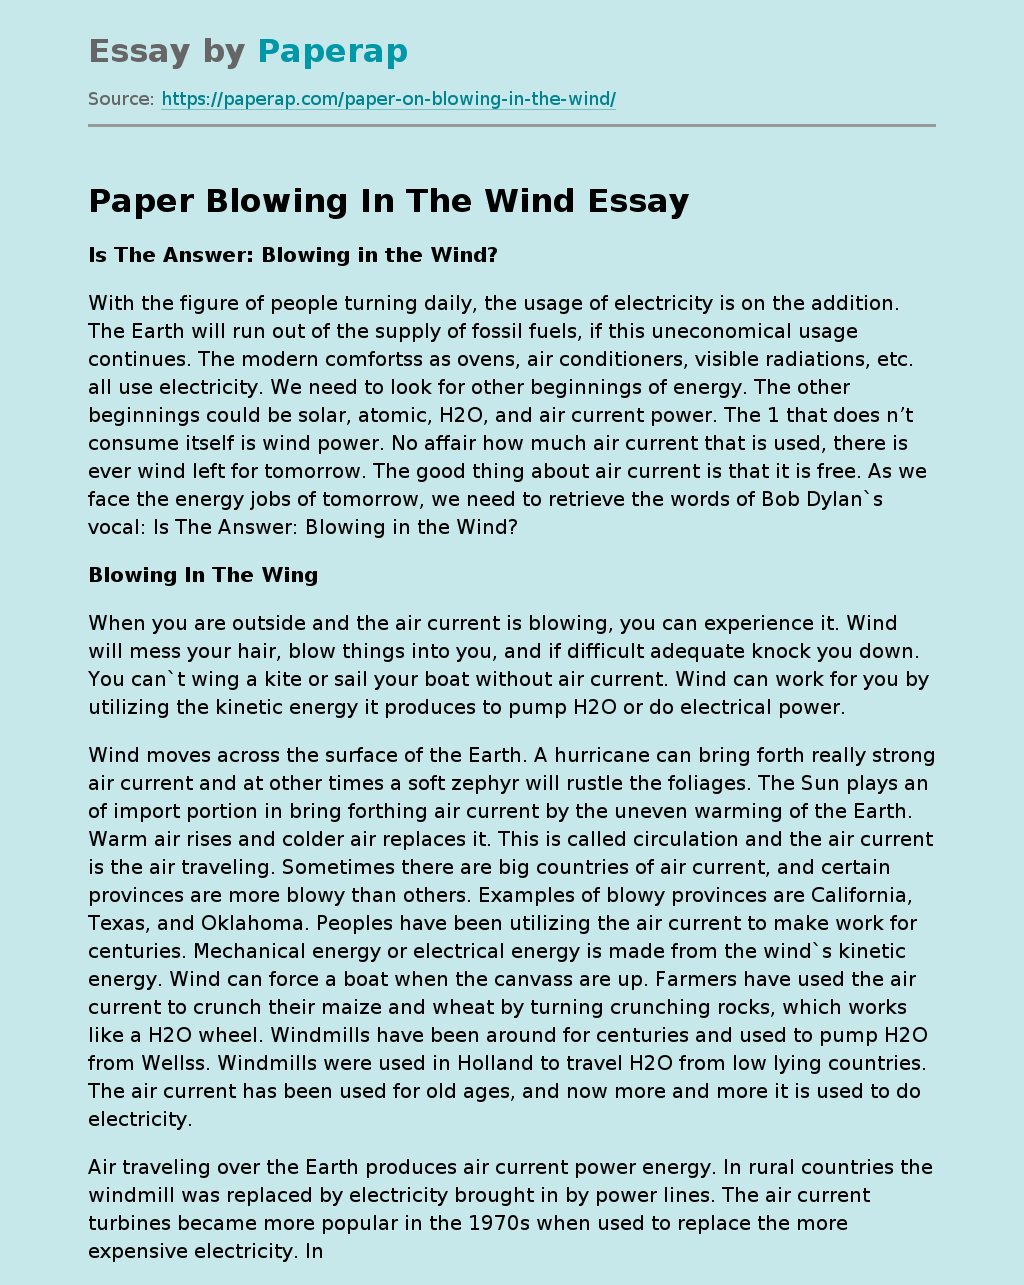 Paper Blowing In The Wind